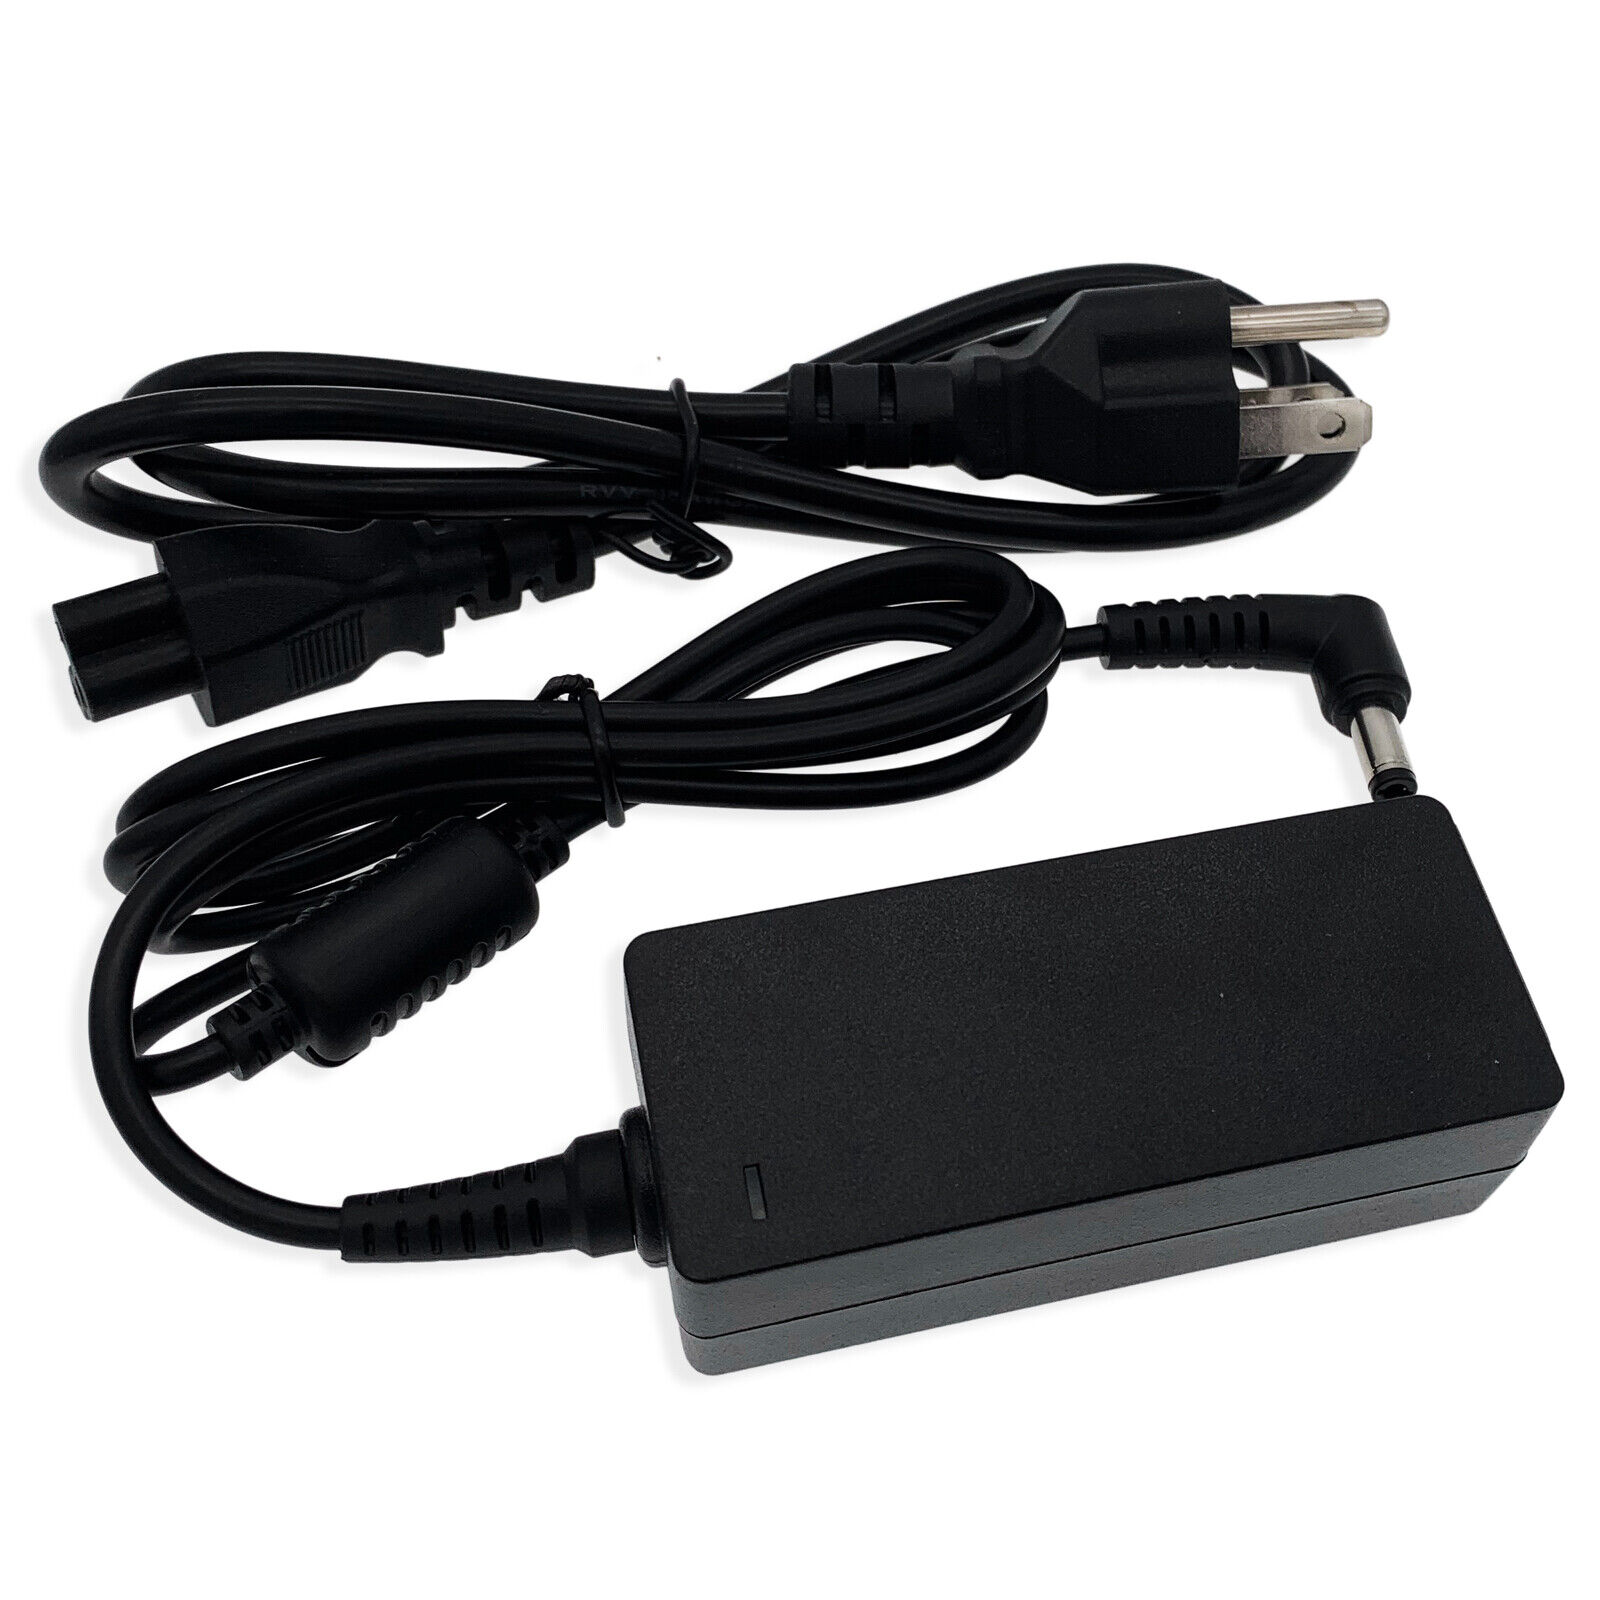 AC Adapter For Epson WorkForce DS-510 DS510 Sheetfed Scanner B11B209201 Charger Construction: 100% Brand New! Generic R